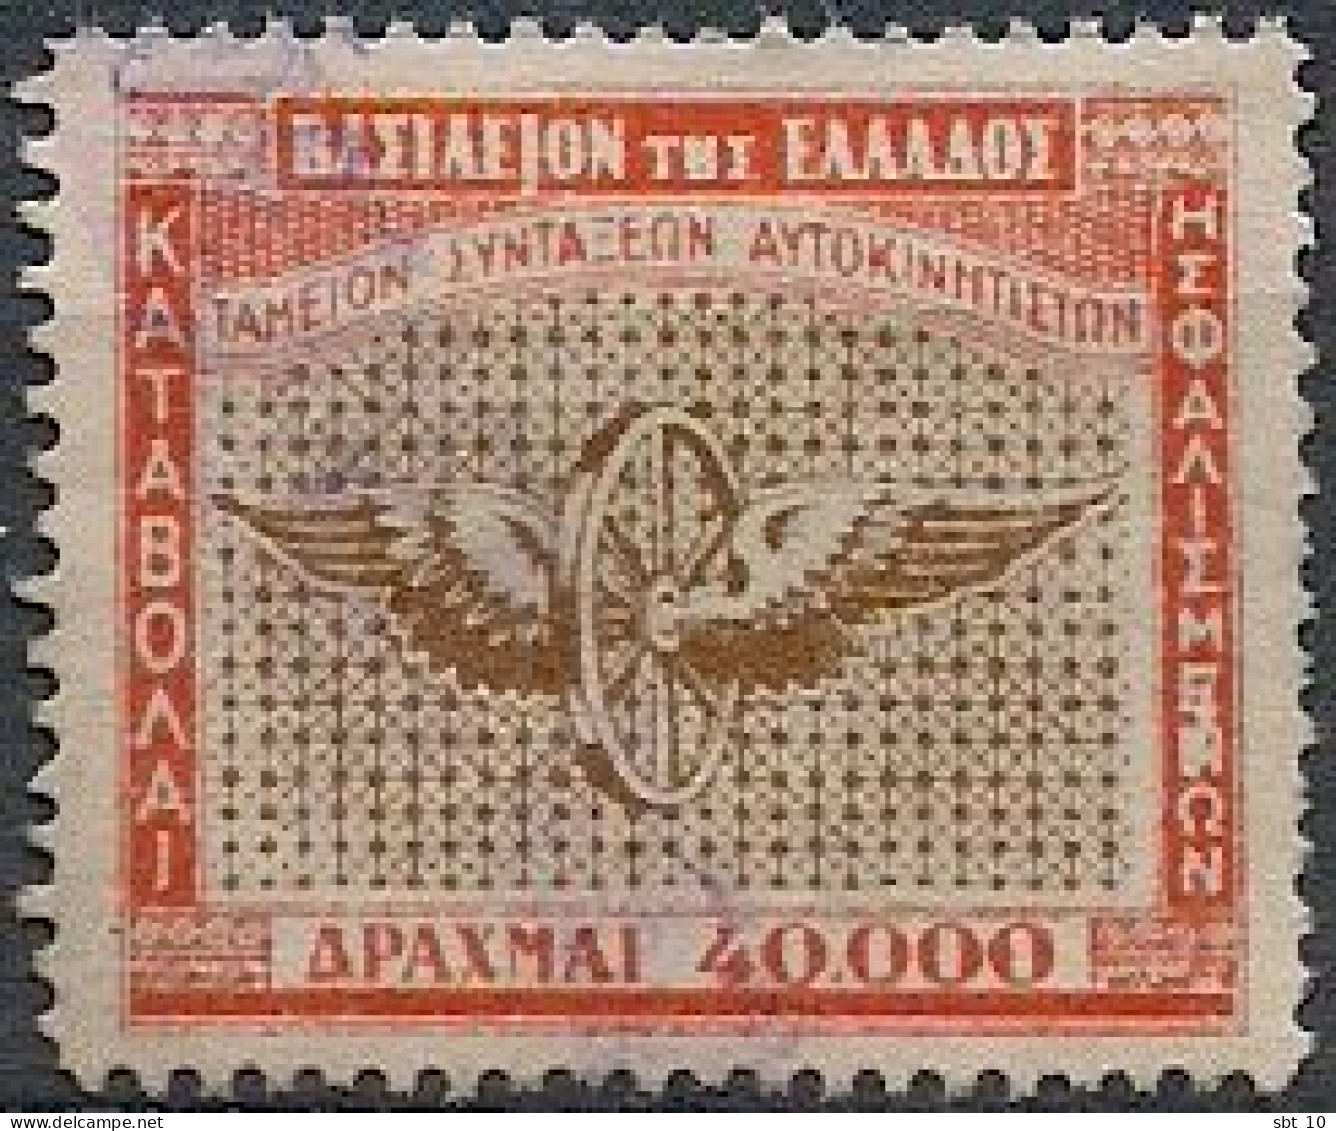 Greece - Pension Fund For Motorists 40000dr. Revenue Stamps - Used - Fiscali